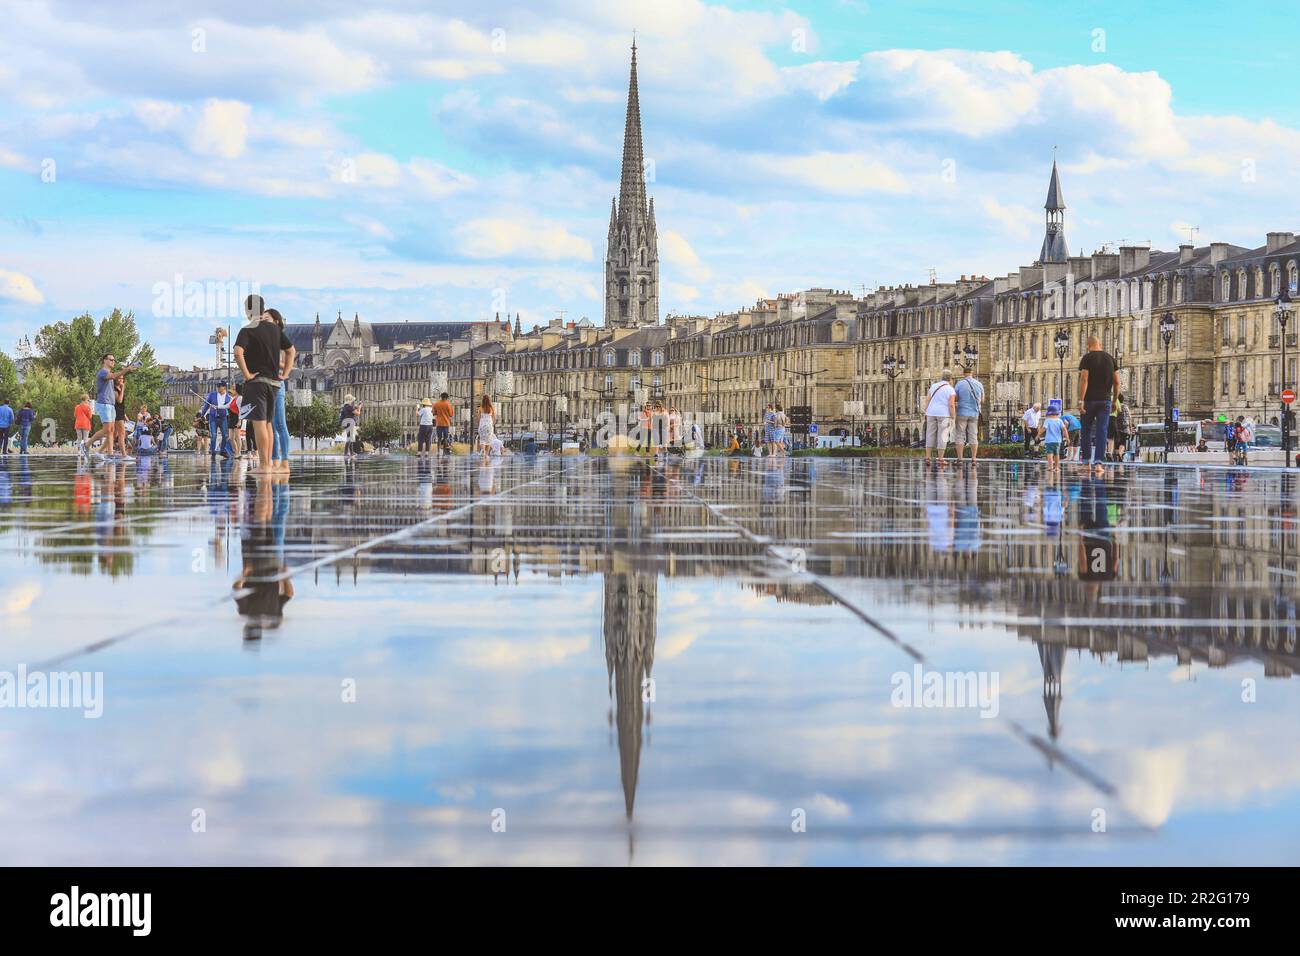 BORDEAUX, FRANCE - 13 September, 2018 : Selective focus on tourists standing on Bordeaux water mirror, it's always full of people in a hotest summer d Stock Photo